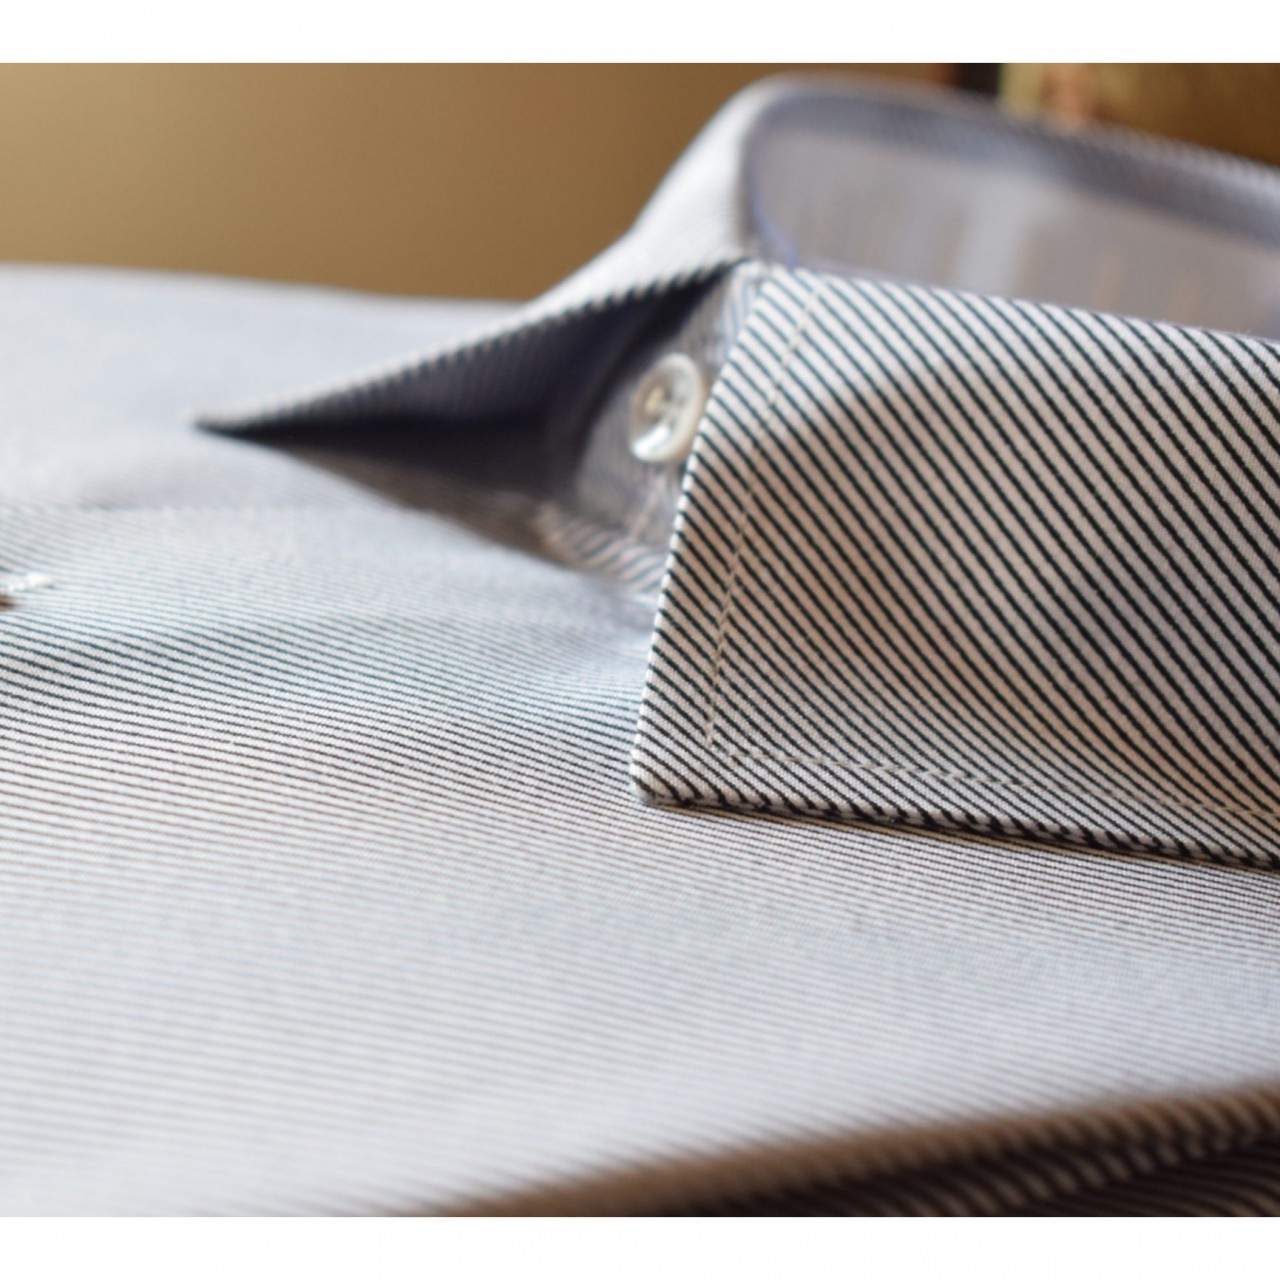 Pin Stripes Formal Shirt For Men - Double Needle Stitching - Light Grey